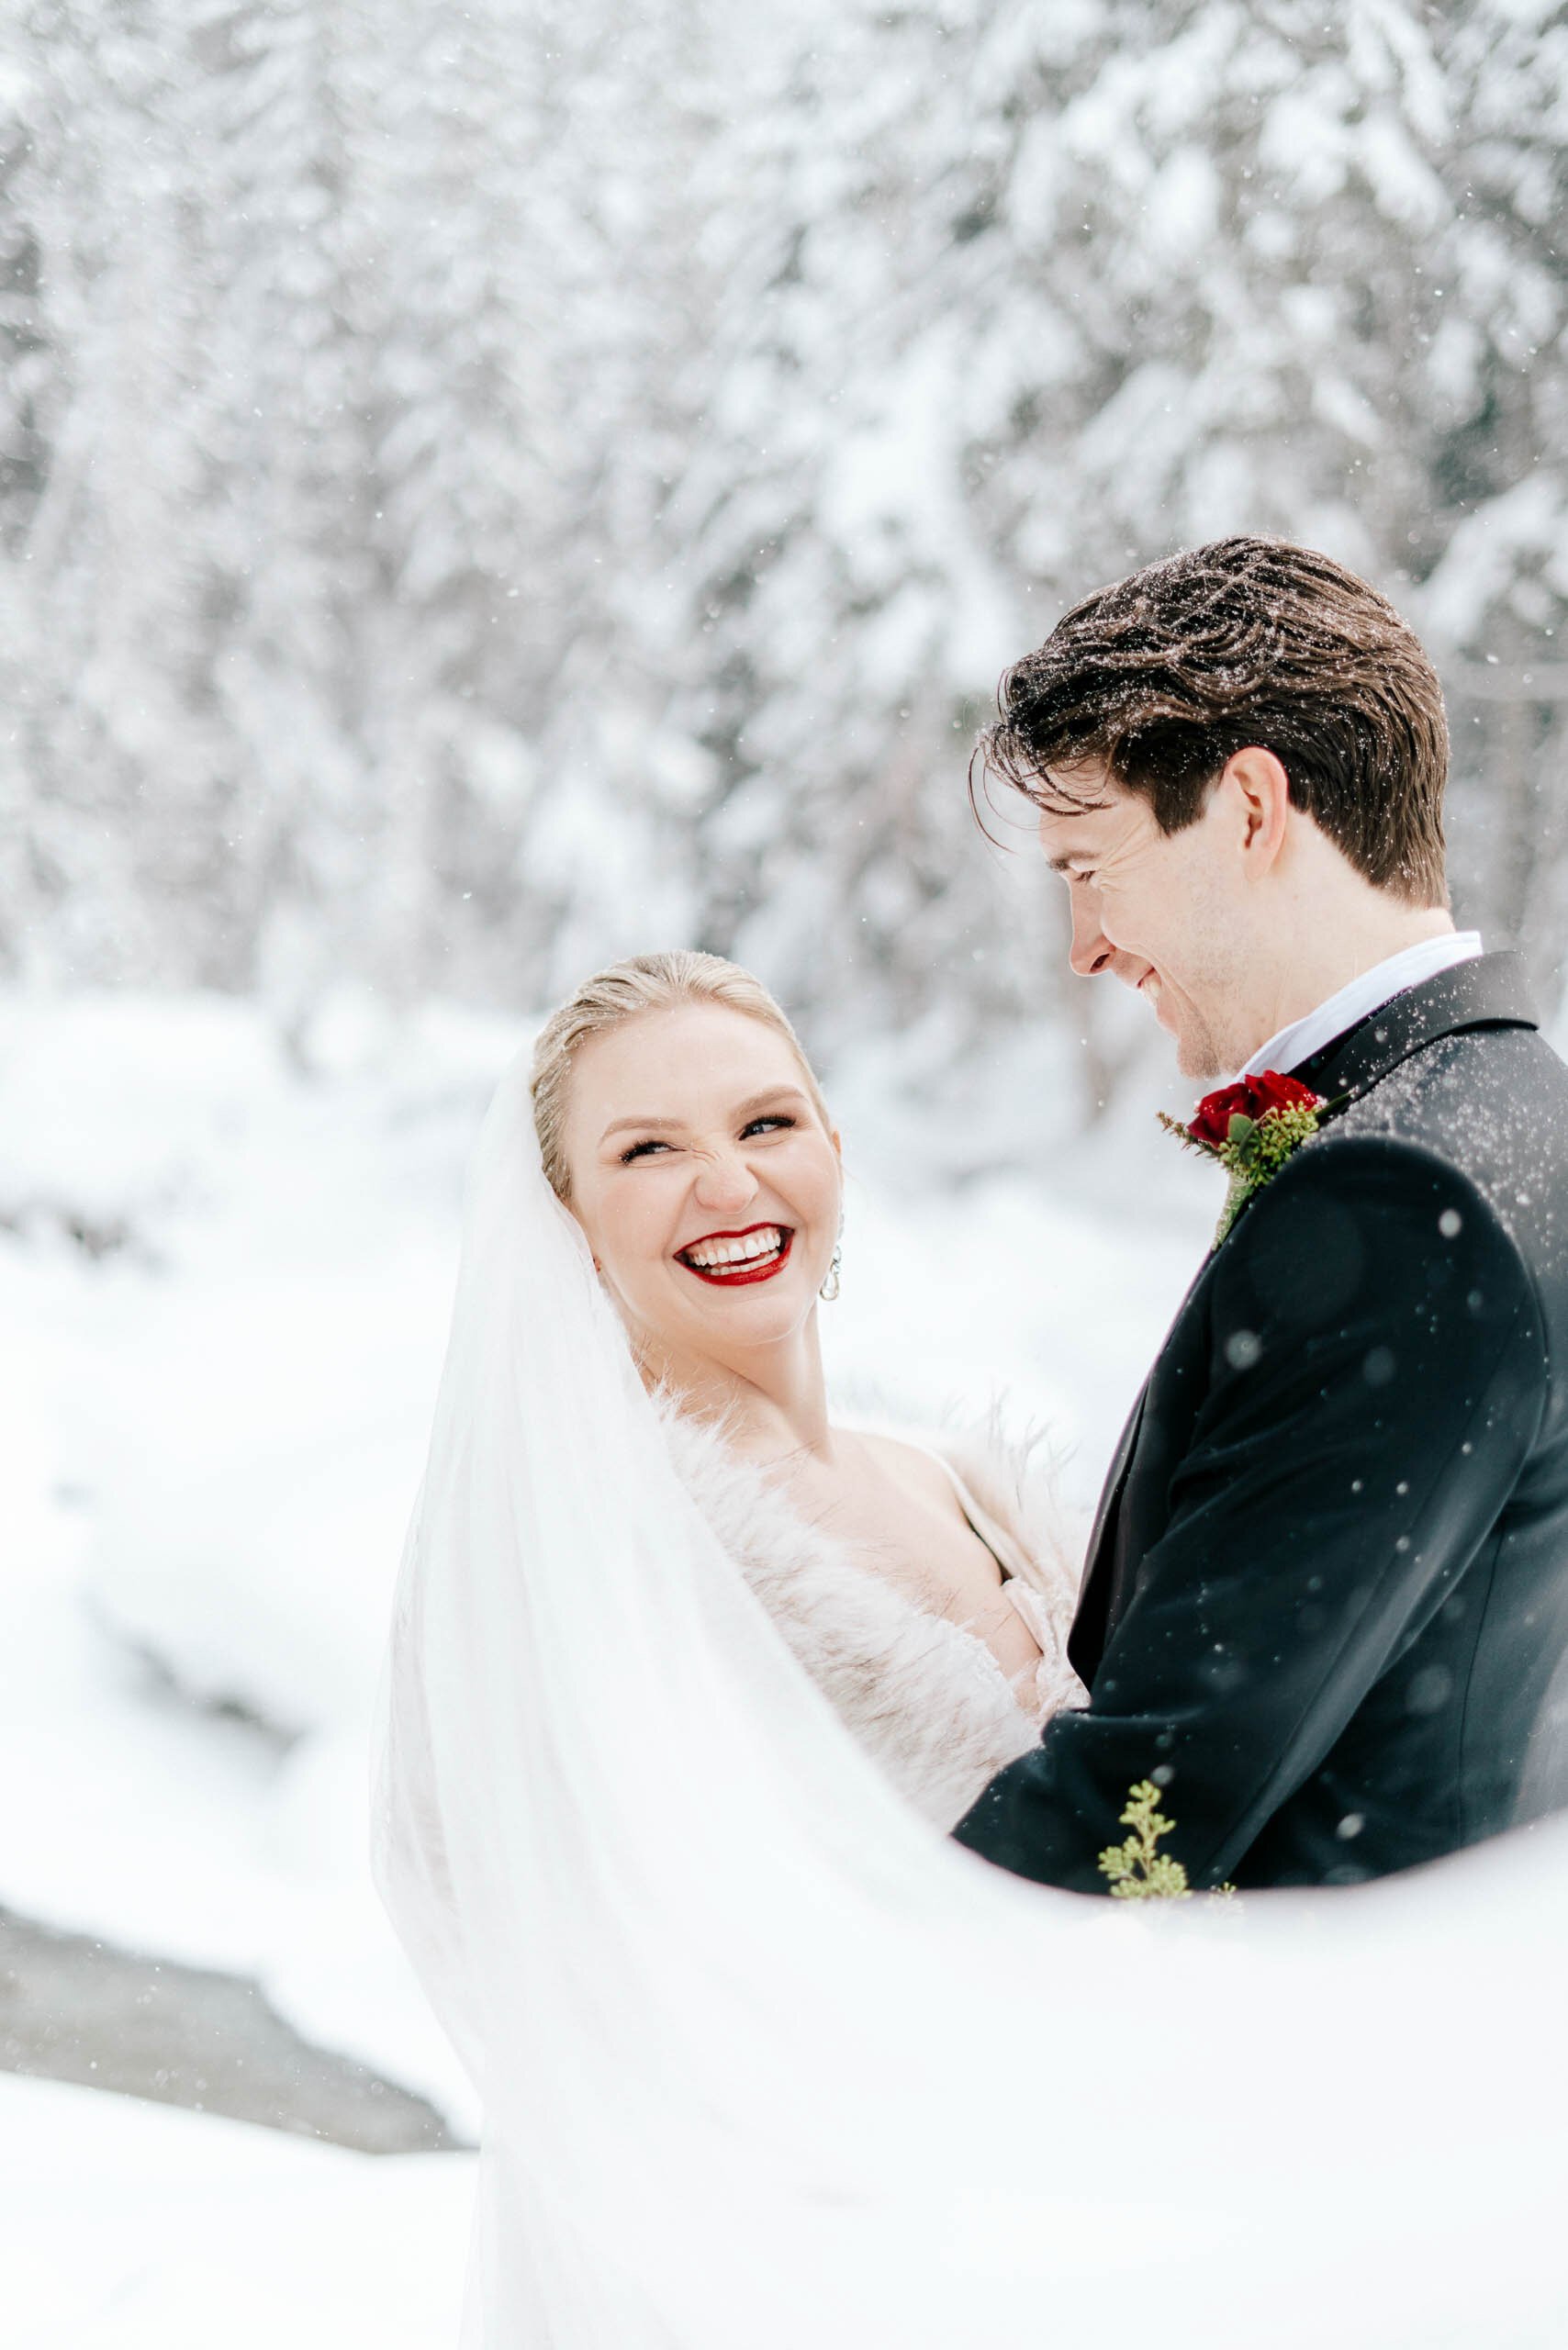 A blonde bride with bright red lip stick smiles at the camera as her veil swoops around her and her groom laughs.